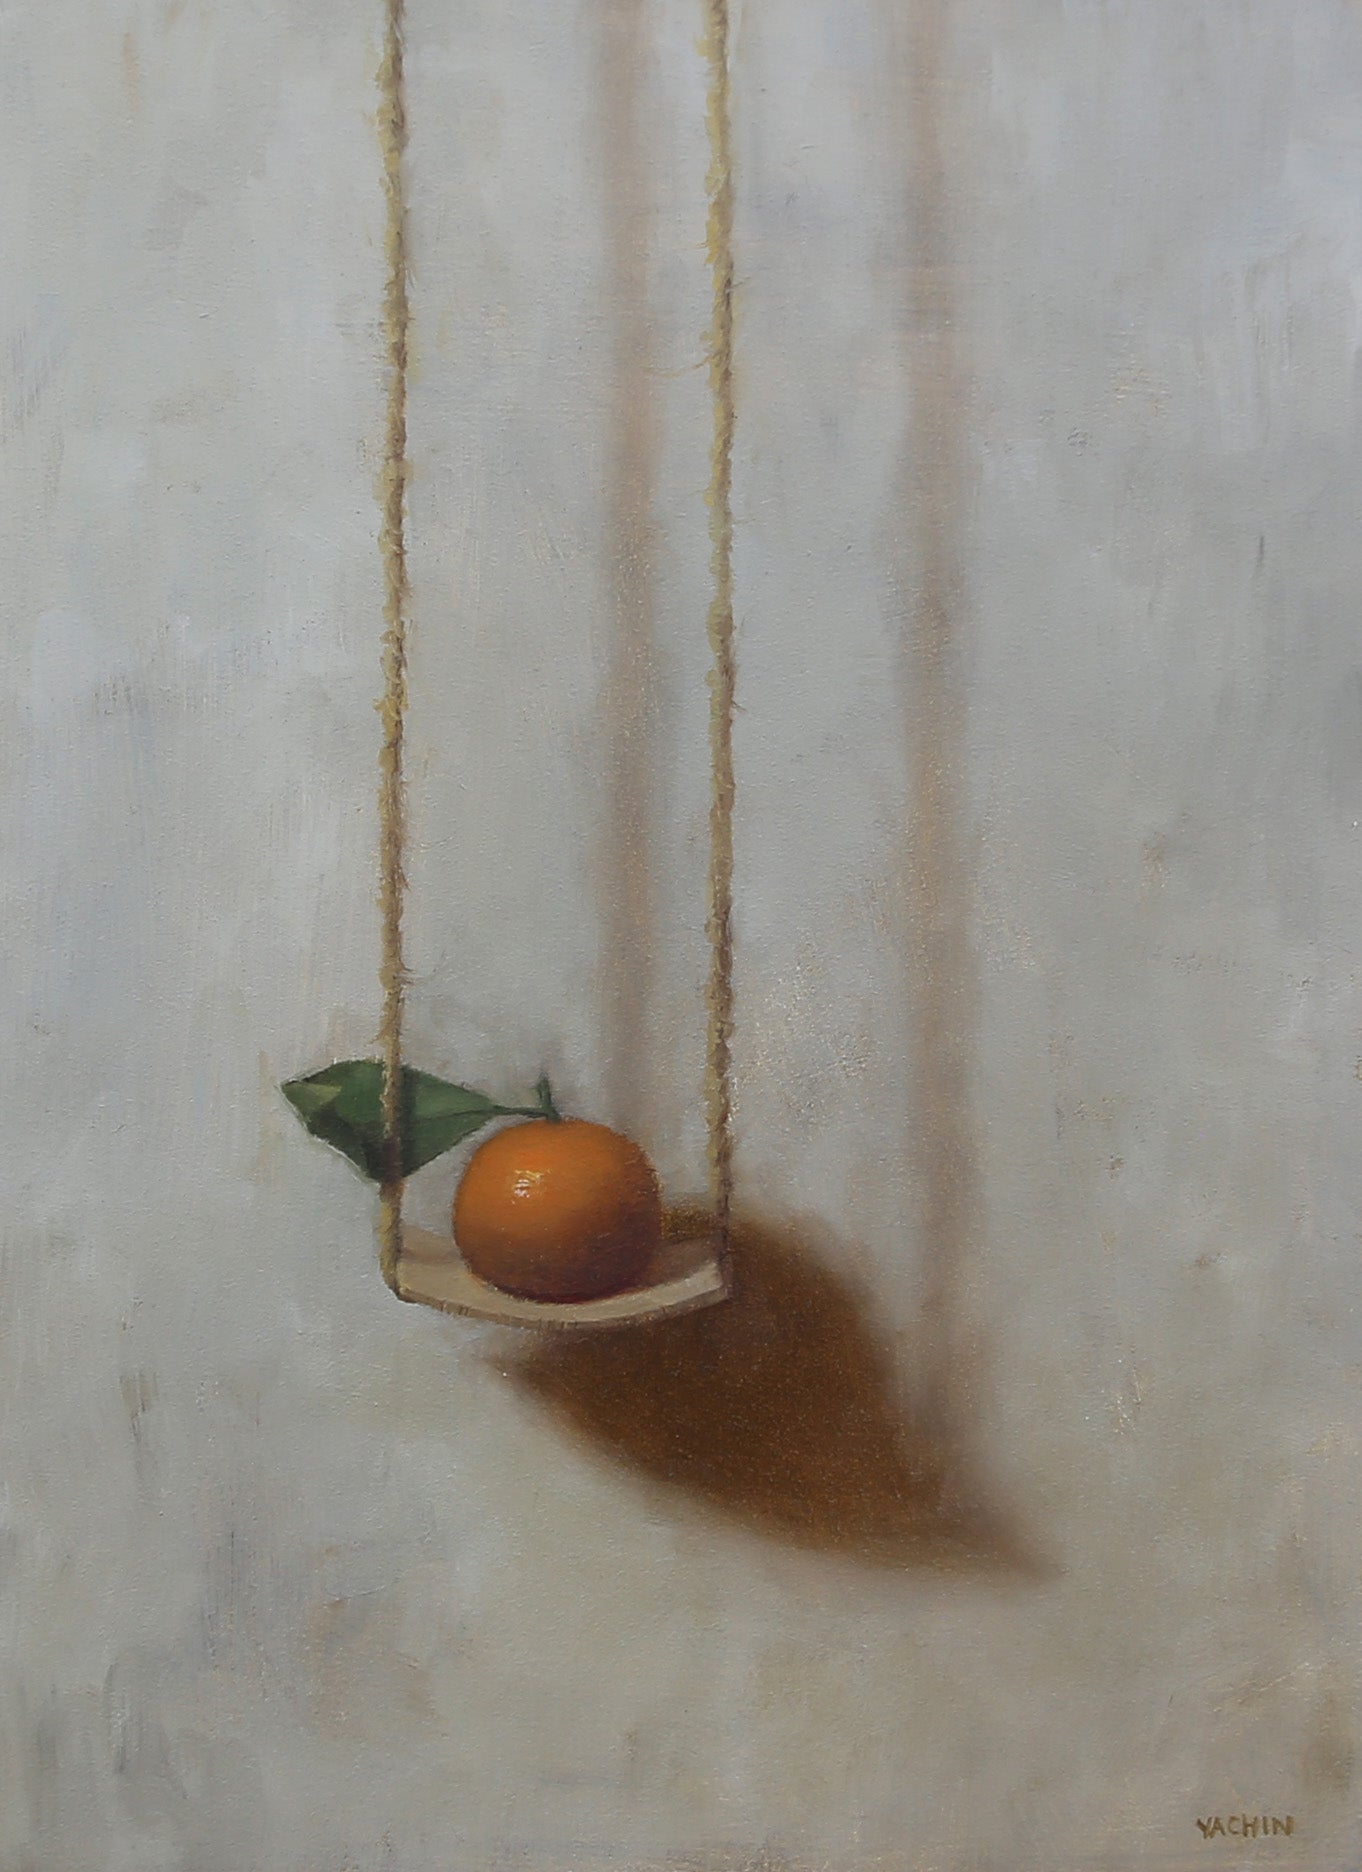 Chang Ya Chin, "Holding on to a Sitting Swing" SOLD